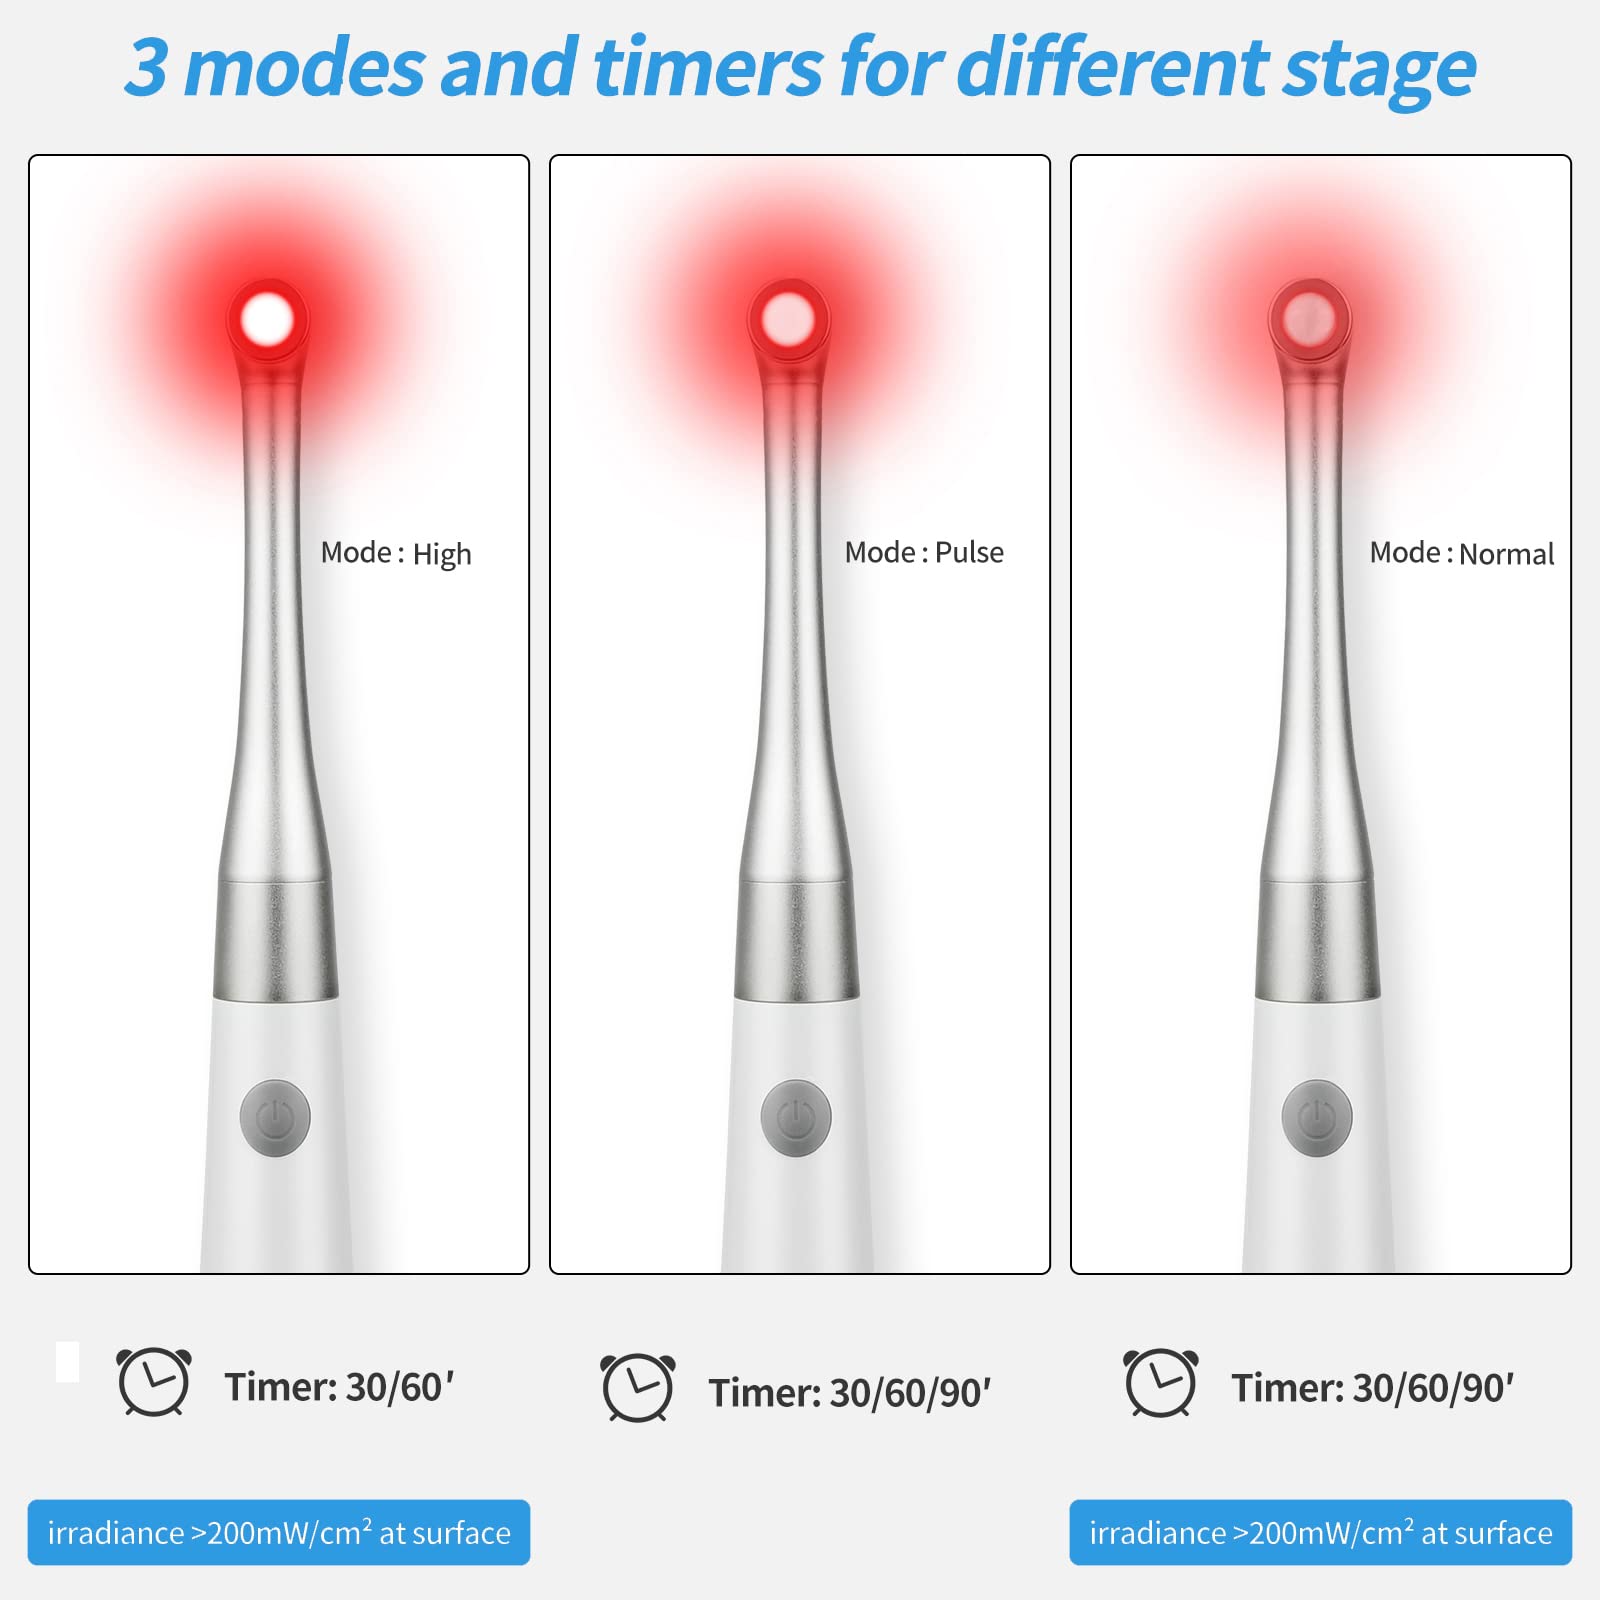 WINLEAD Cold Sore Red Light Therapy Device, Dual Wavelength Red Light Therapy for Cold Sore and Canker Sore, Pain Relief and Accelerated Healing Skin Mouth Sore Device